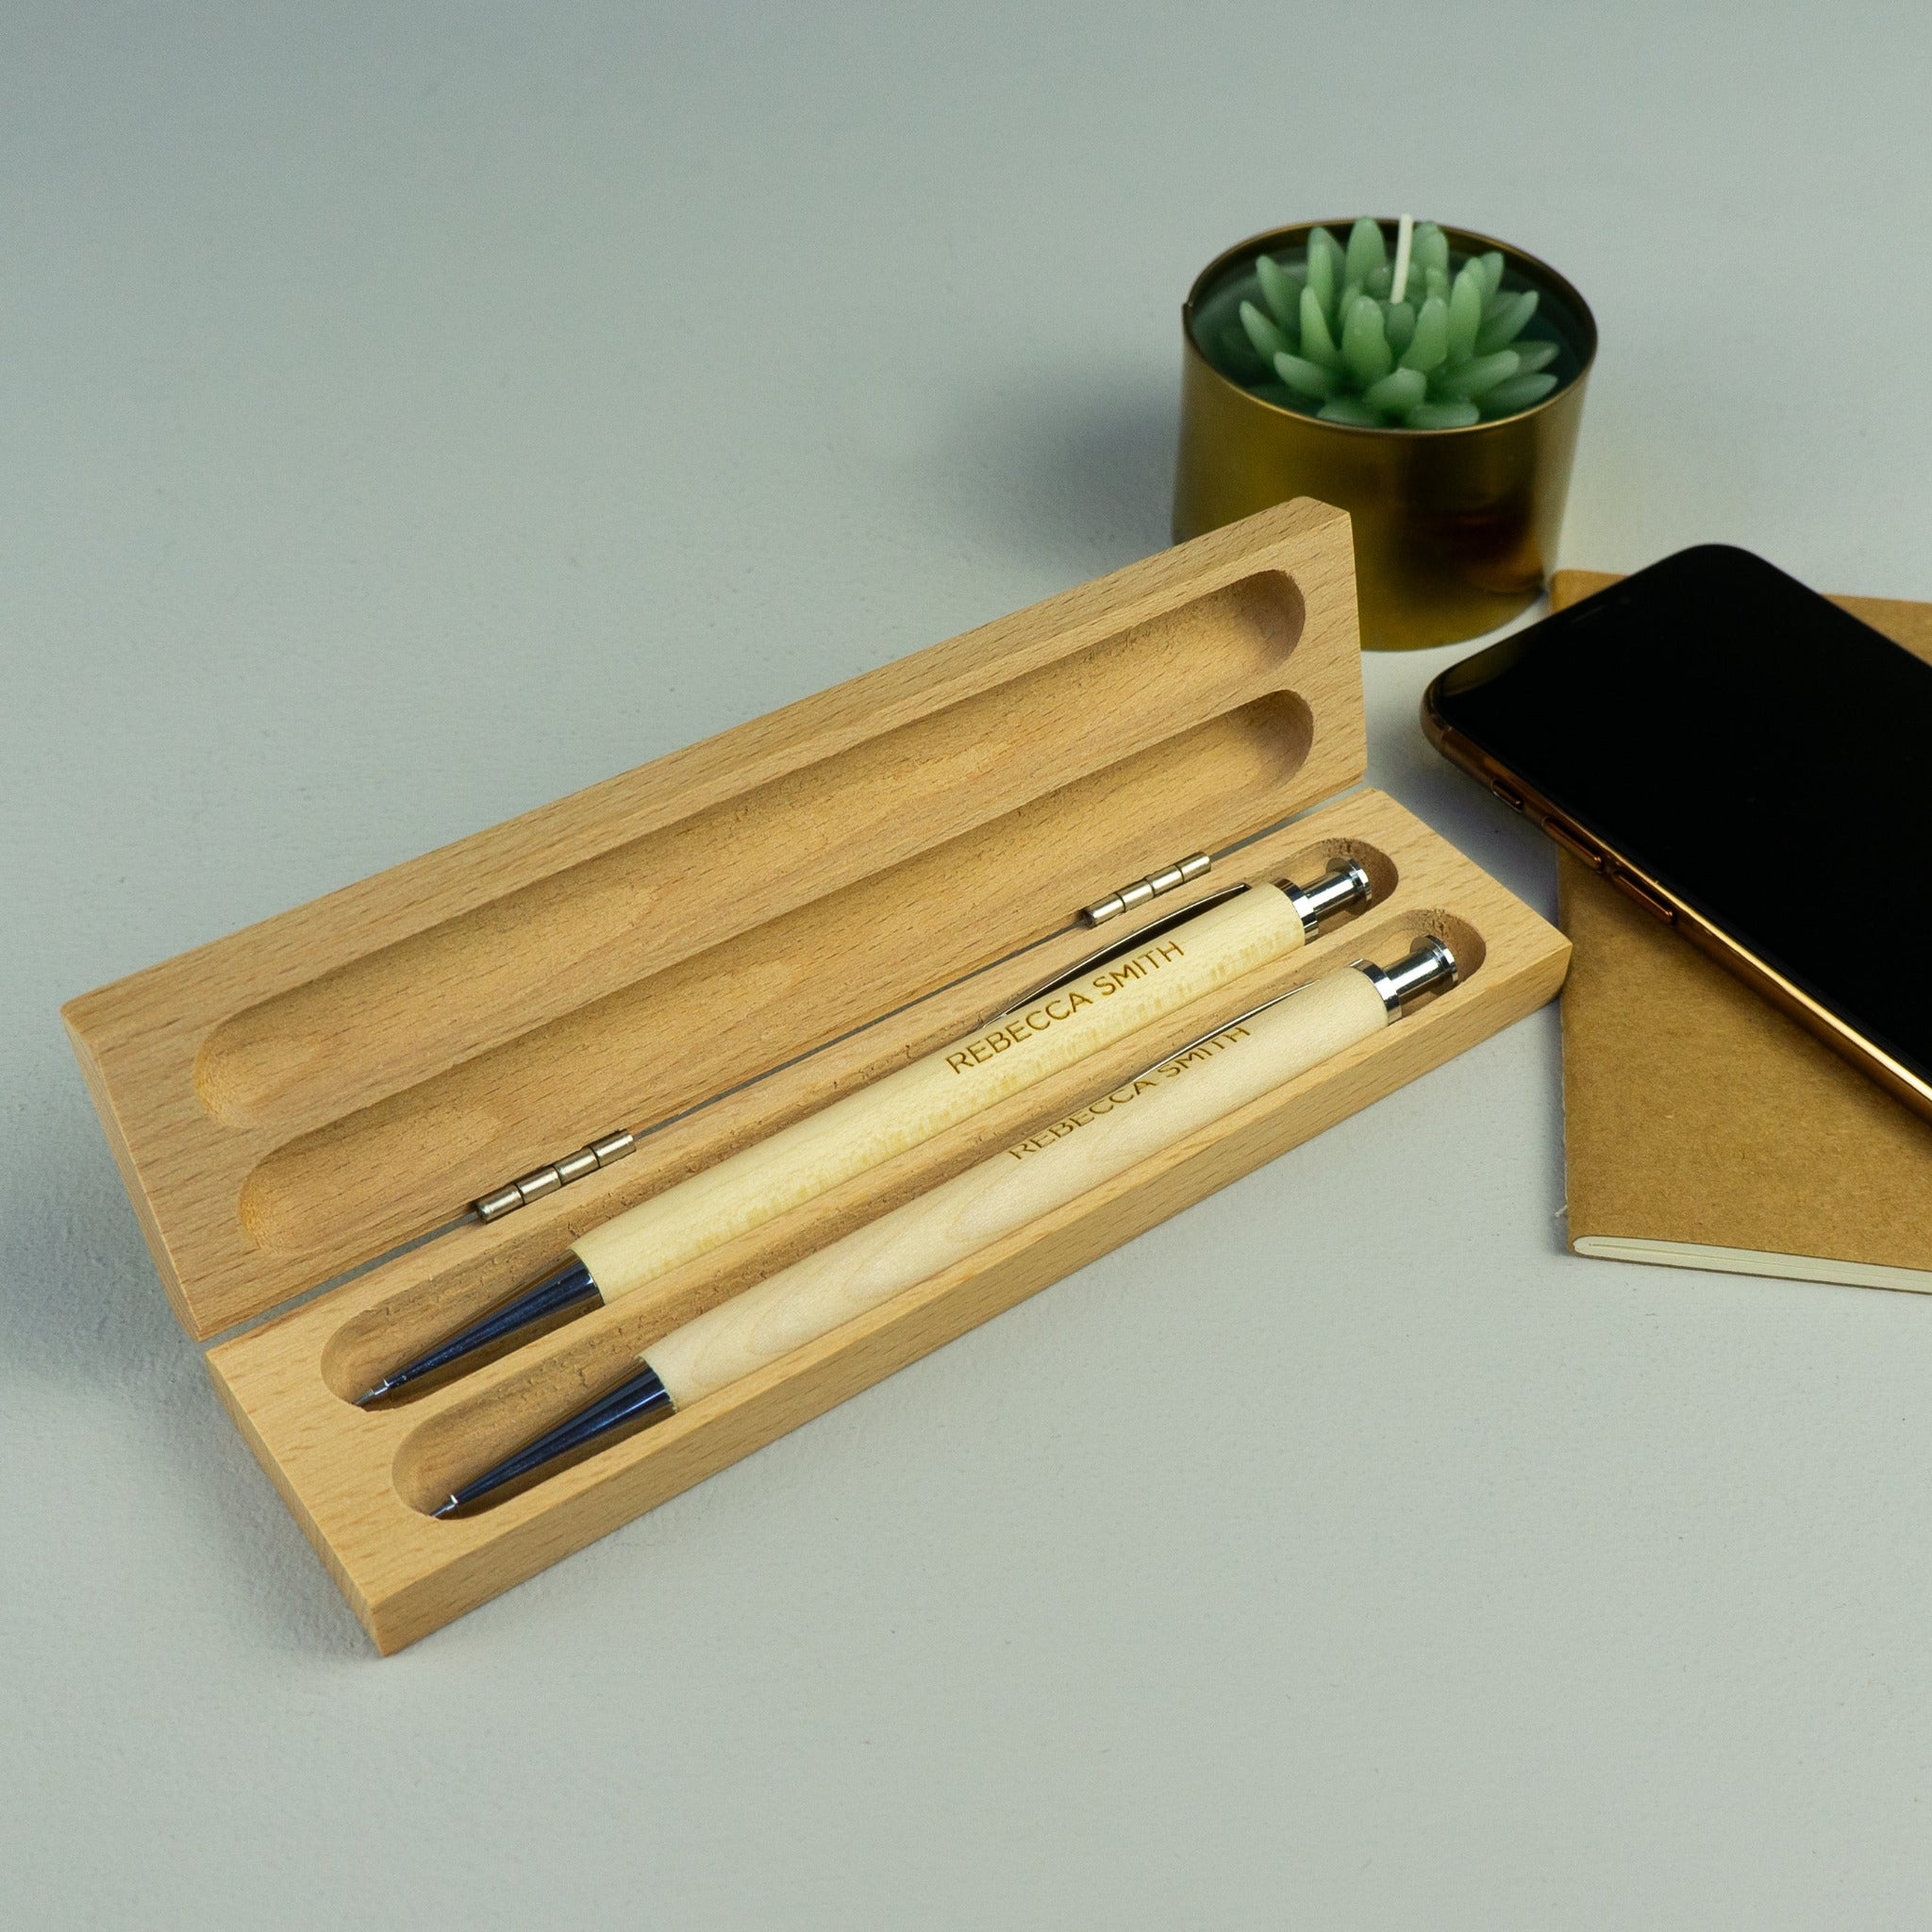 Wooden pen and pencil gift set